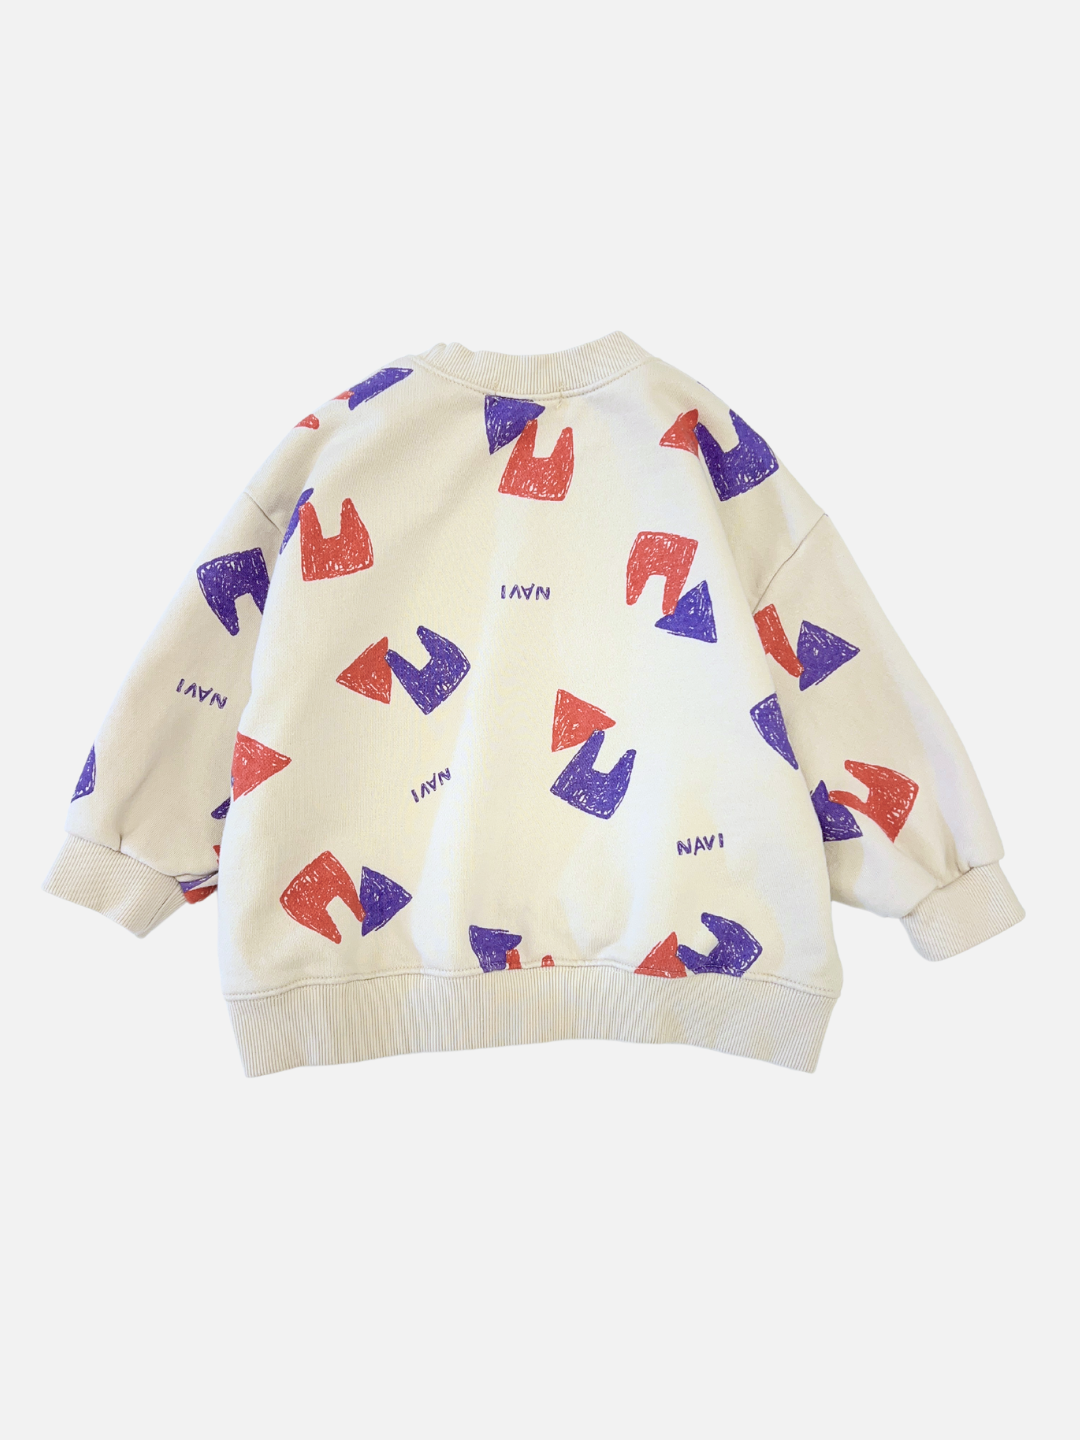 Back view of kids beige crewneck sweatshirt with an all over pattern of red and purple shapes and the brand name Navi.